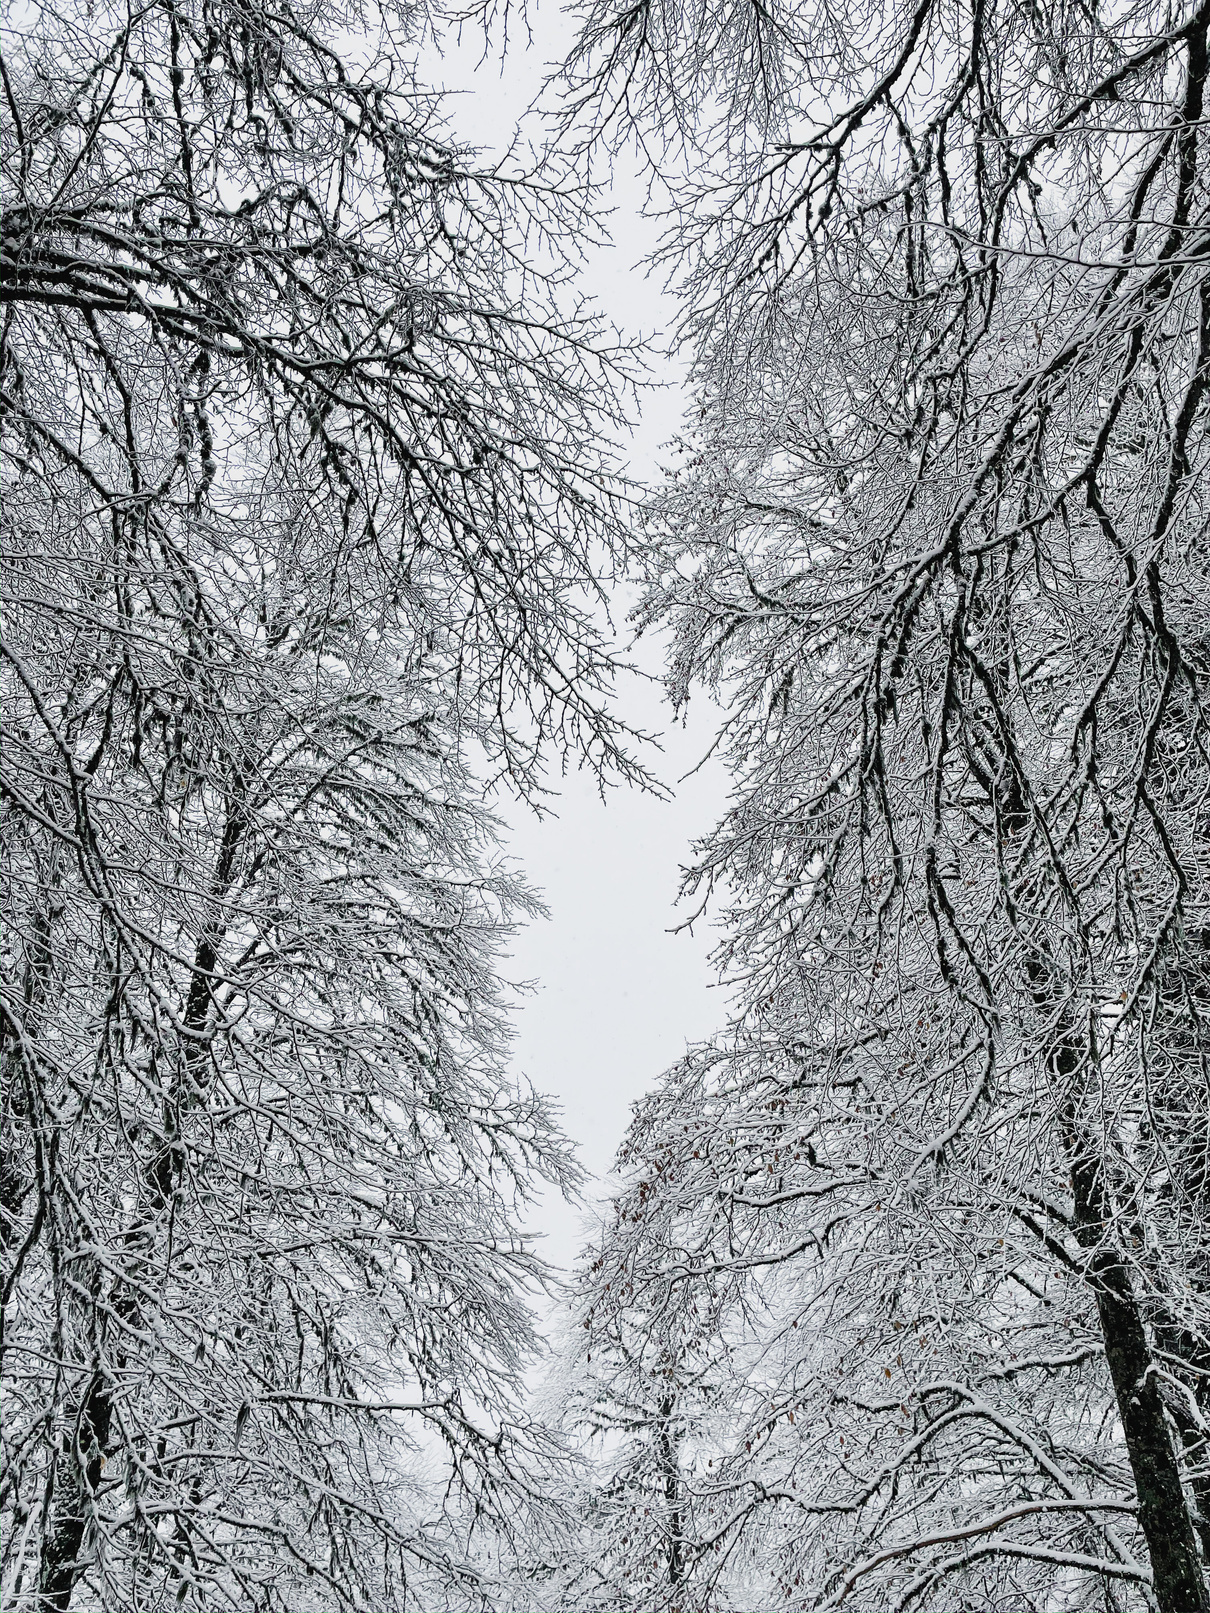 Leafless Trees Covered in Snow 